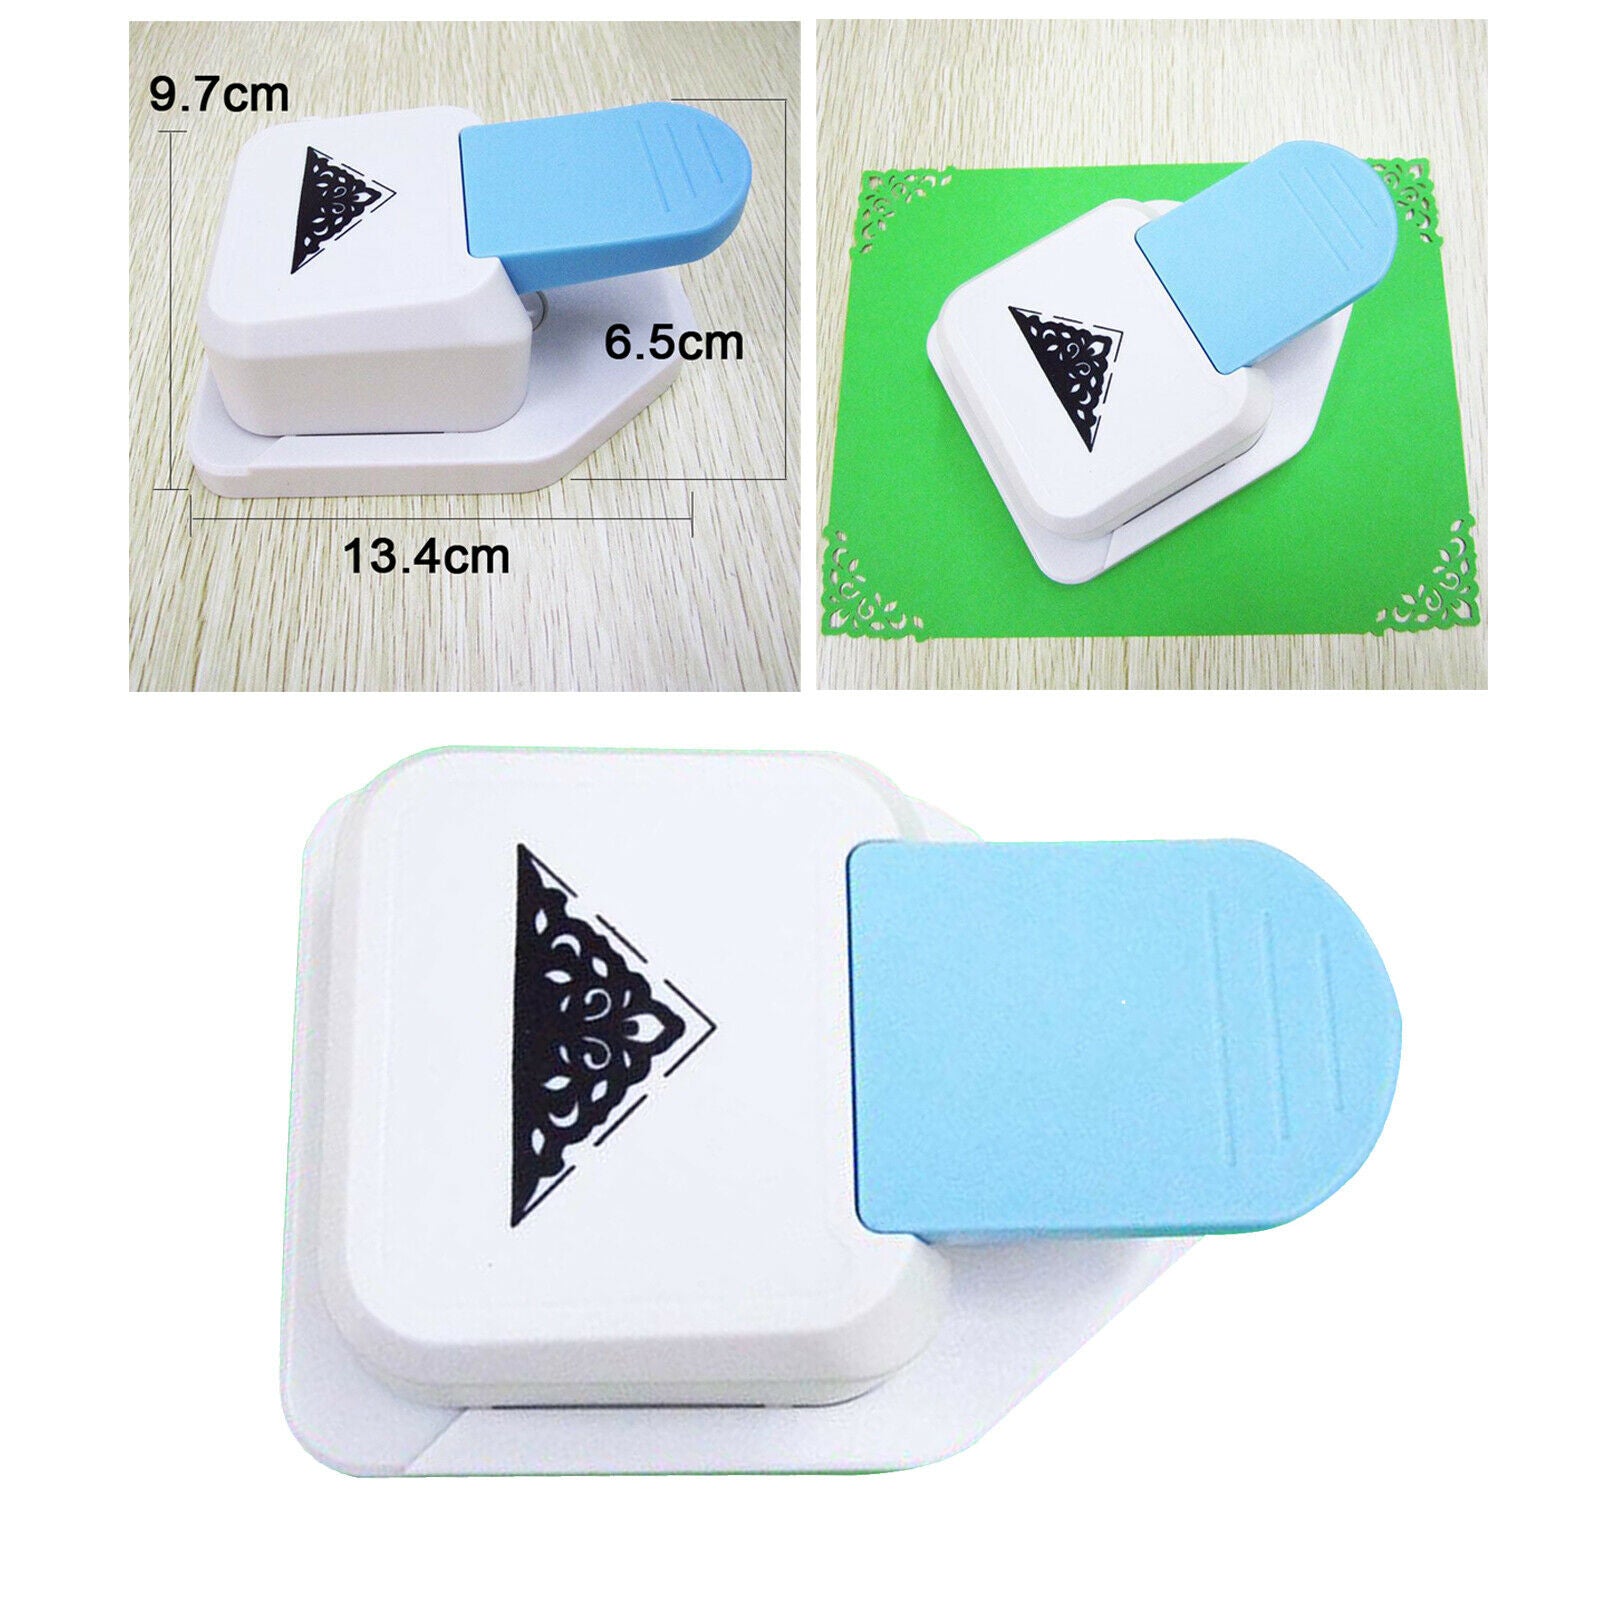 Paper Punch Device Paper Border Cutter Punchers for Hand Account Bookmark